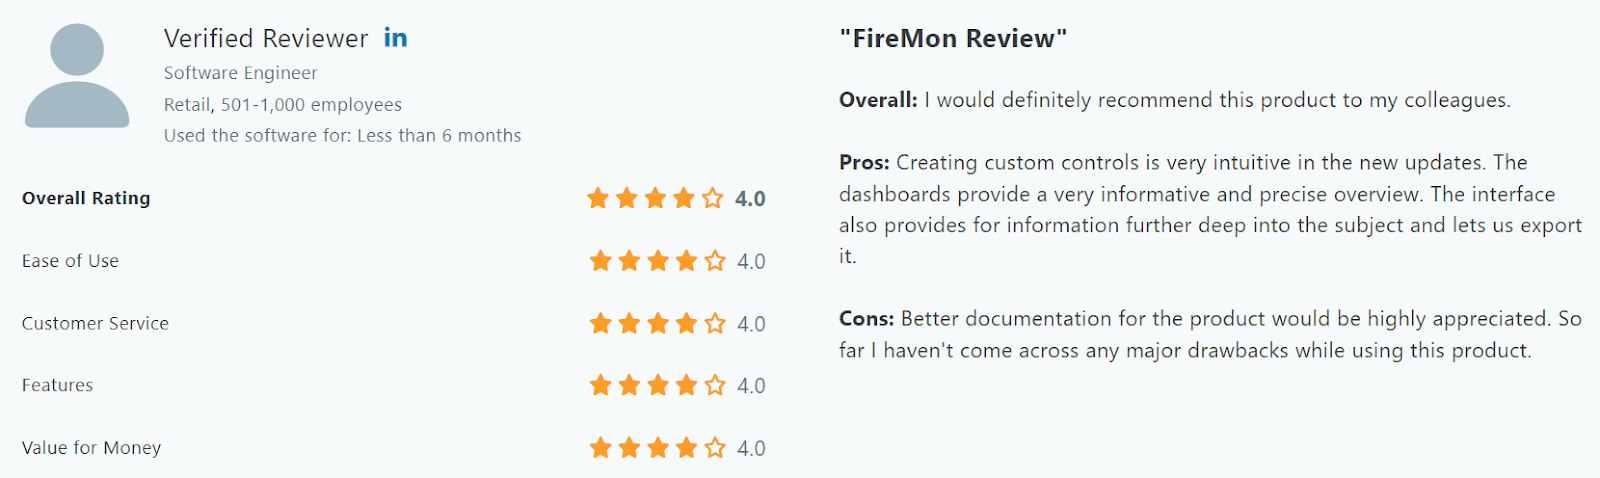 This image gives a user review about FireMon, one of the Qualys alternatives. It is taken from Capterra.